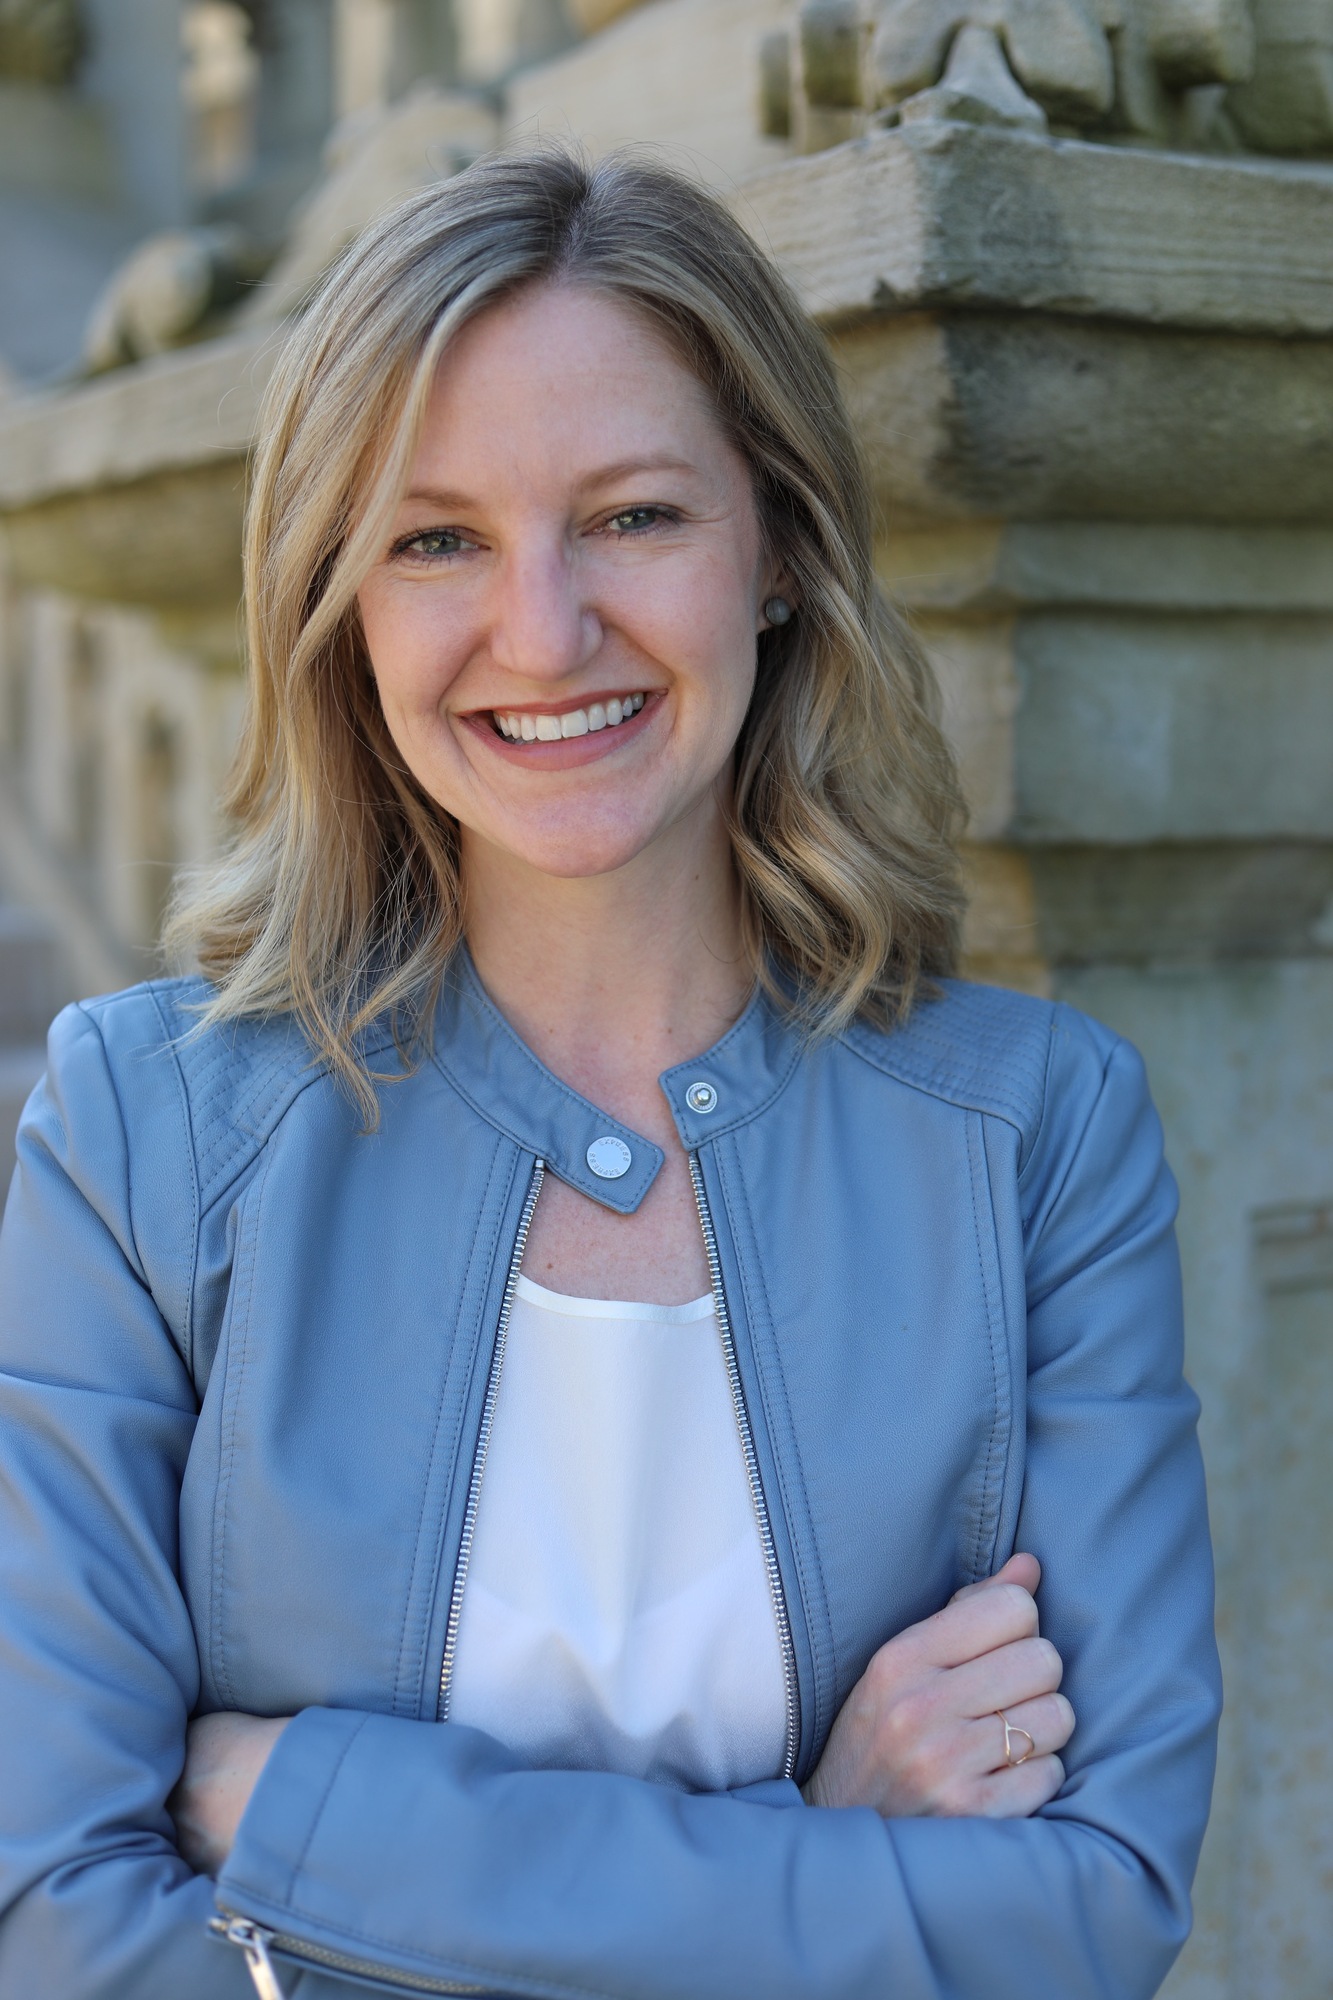 MPP alumna to lead Michigan’s State Budget Office